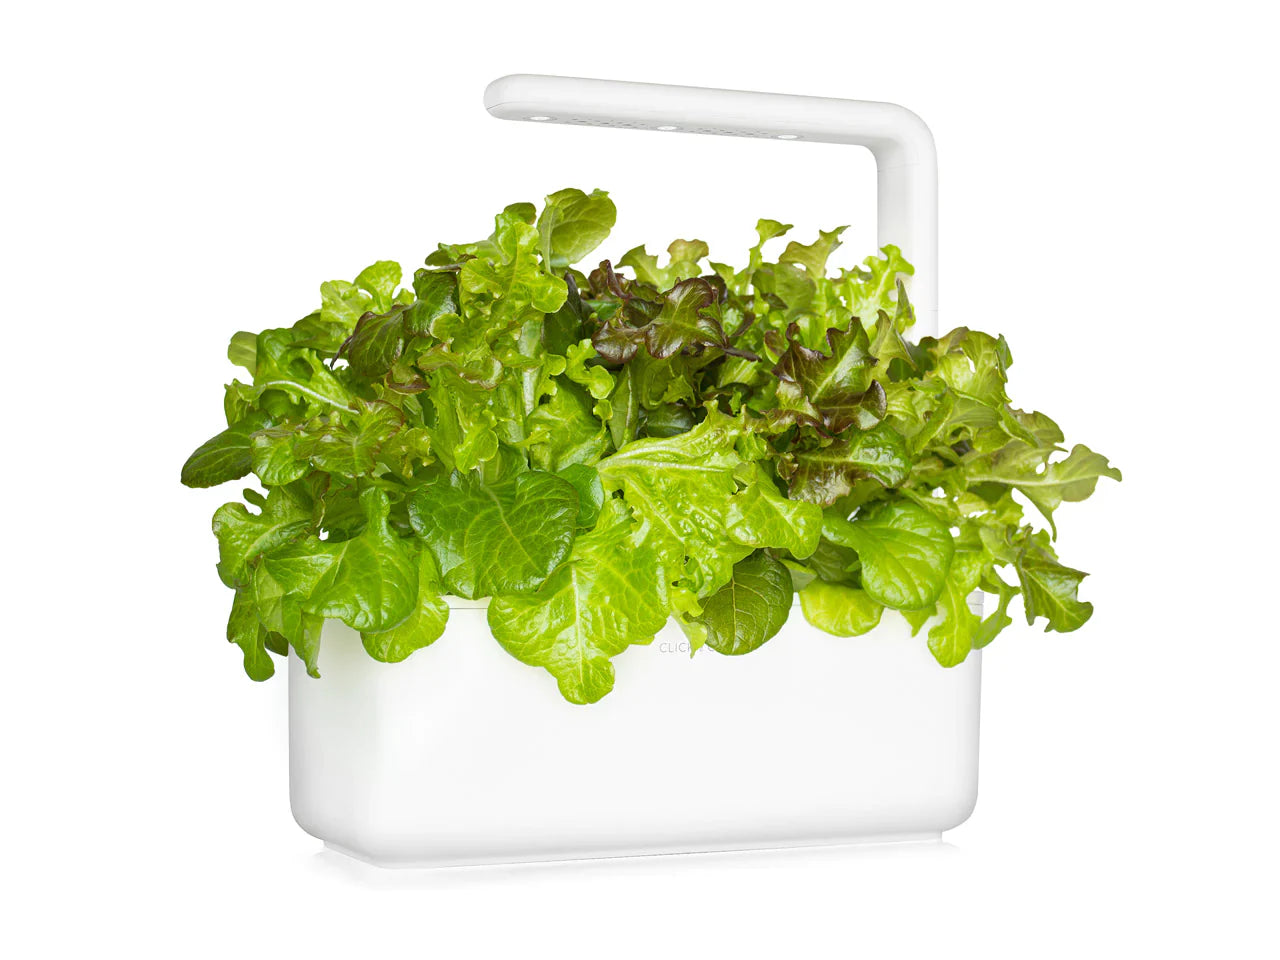 Click & Grow Smart Garden 3 with Red Oakleaf Lettuce